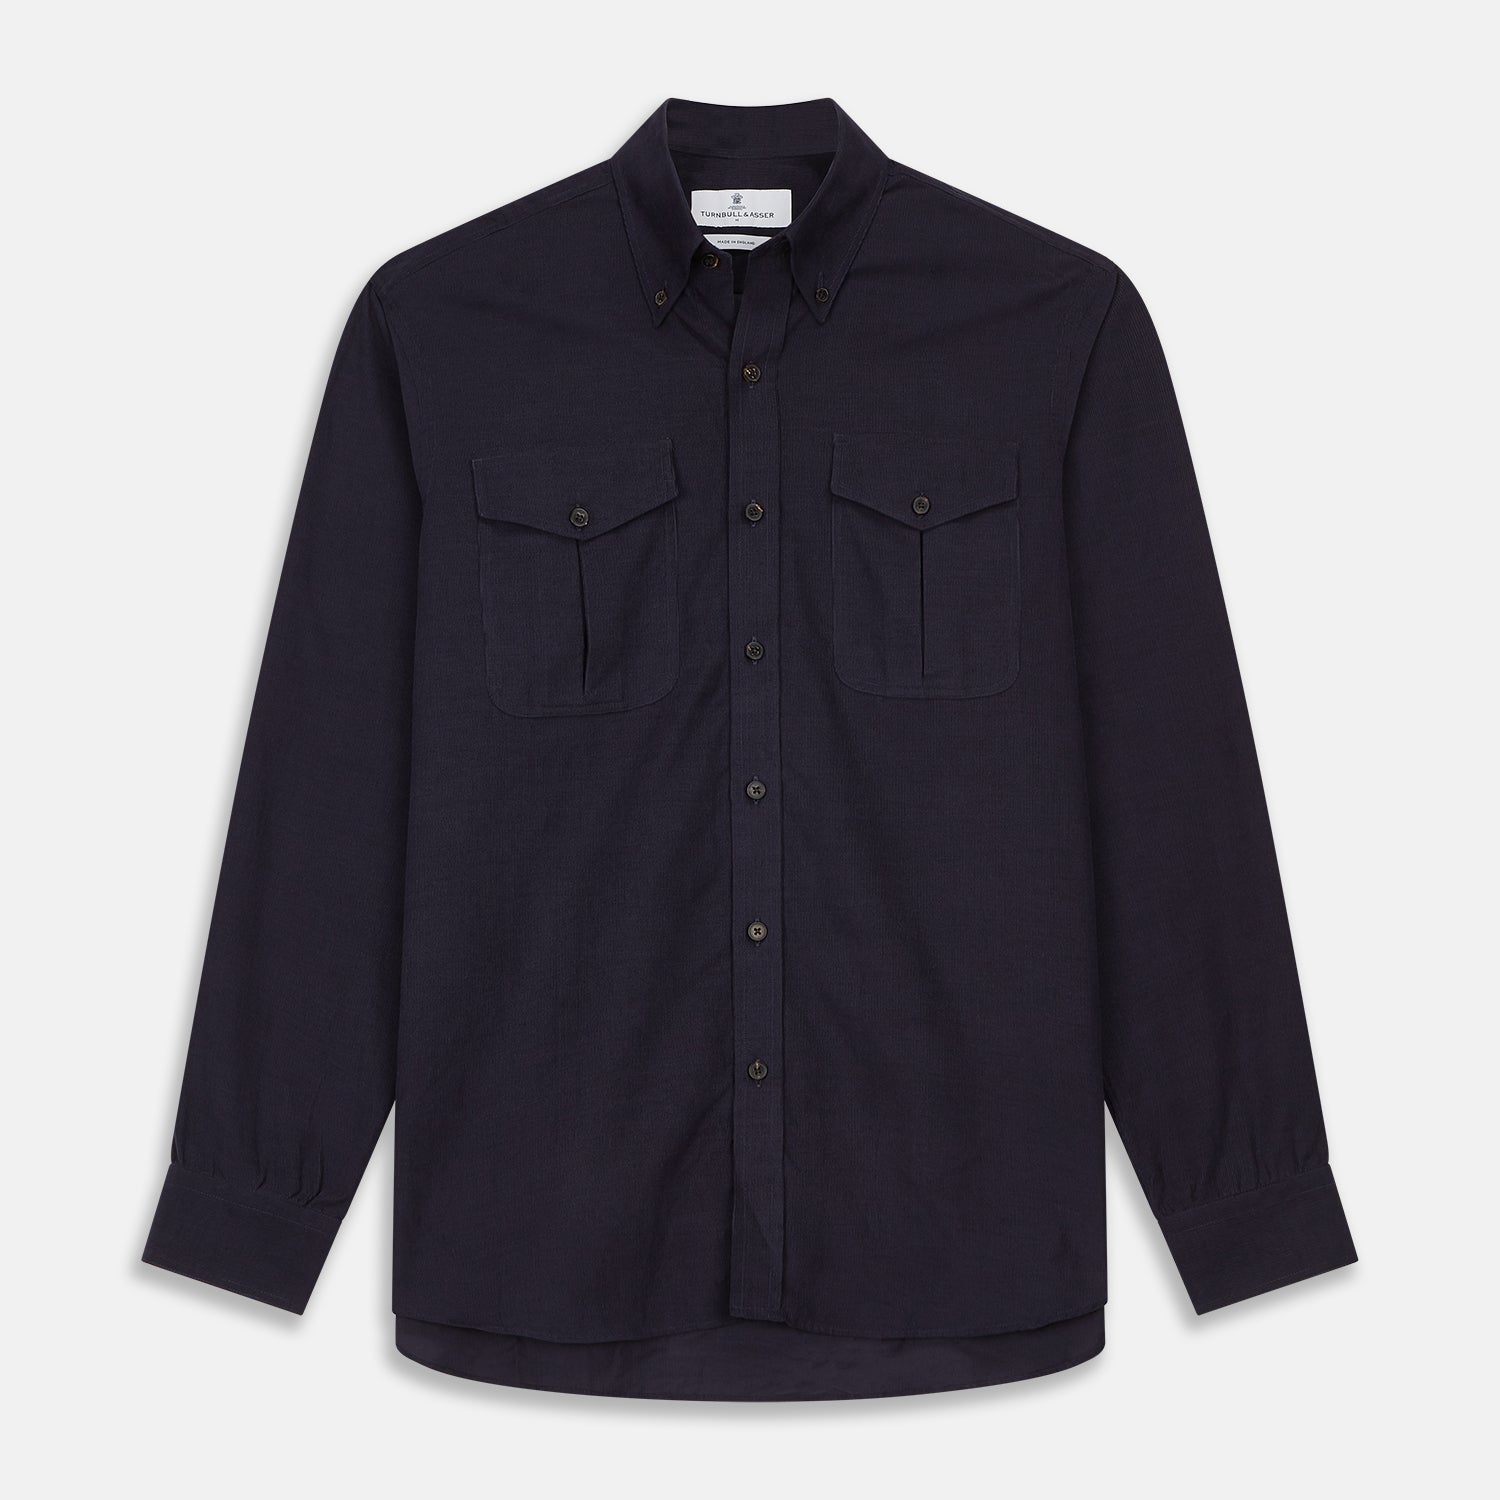 Midnight Blue Corduroy Officer Weekend Fit Shirt with Dorset Collar and 1-Button Cuffs